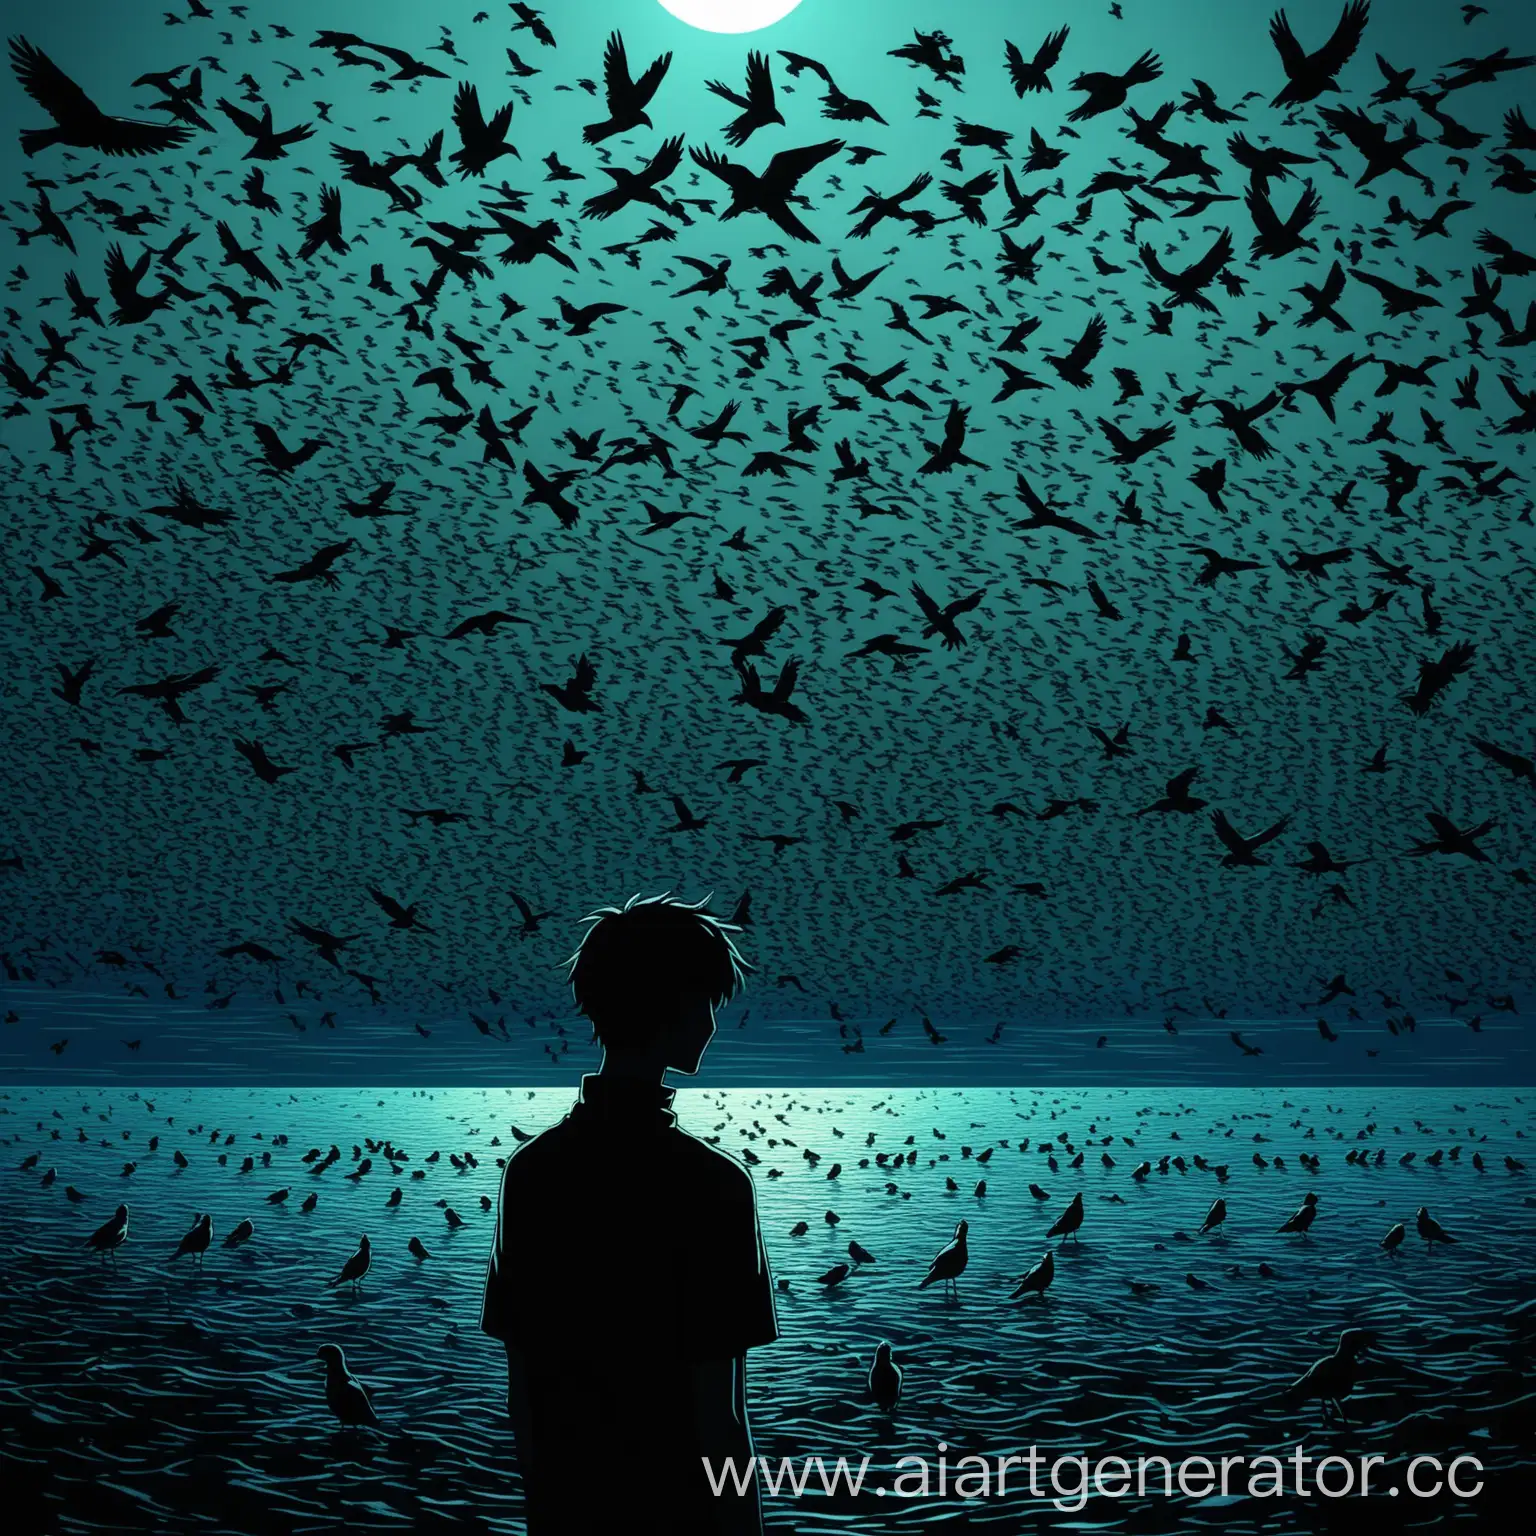 Shinji-from-Evangelion-Surrounded-by-Nibbling-Birds-in-Psychedelic-Atmosphere